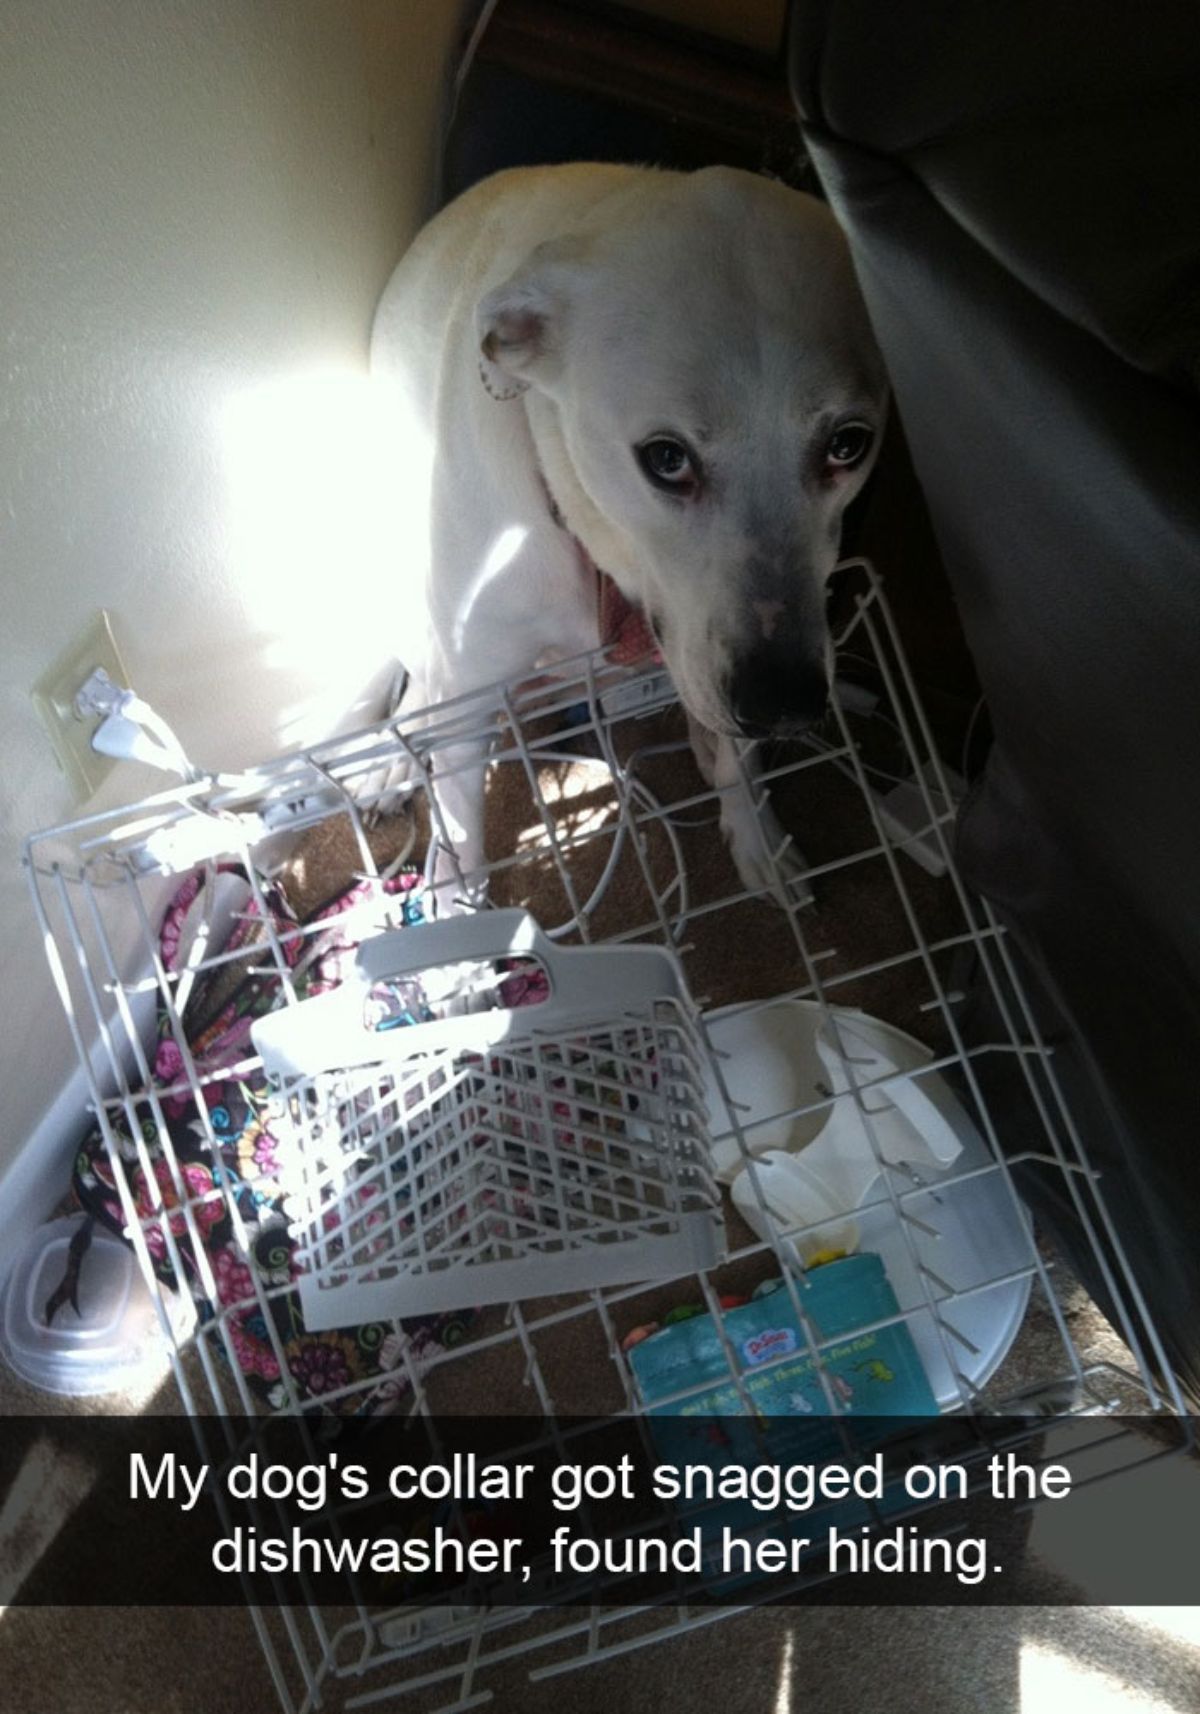 white dog with a dishwasher rack full of dishes stuck on the collar with a caption saying my dog's collar got snagged on the dishwasher, found her hiding